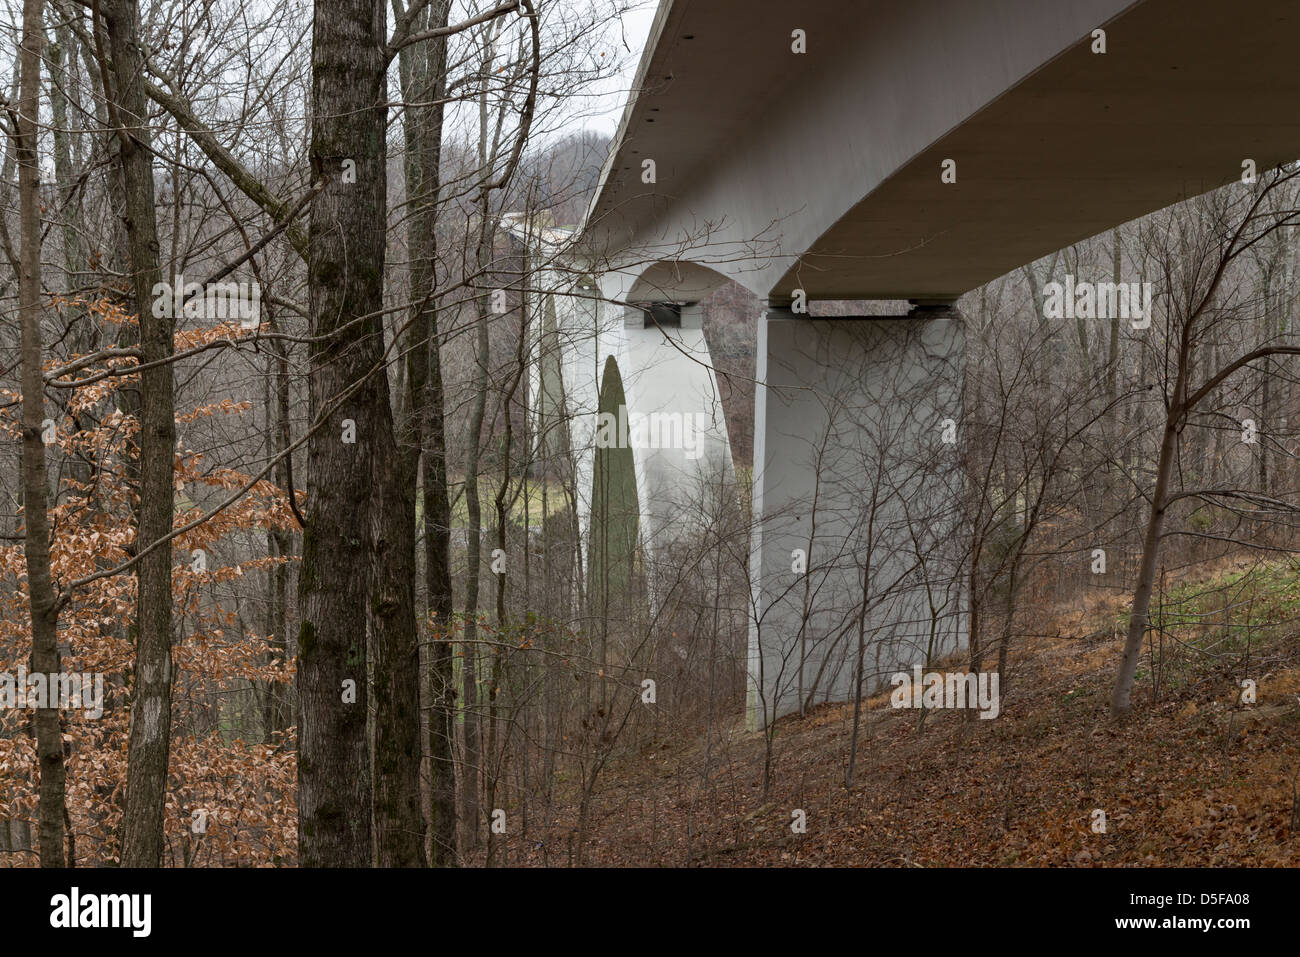 A view of the Natchez Trace Parkway Bridge in Franklin, Tennessee. Stock Photo